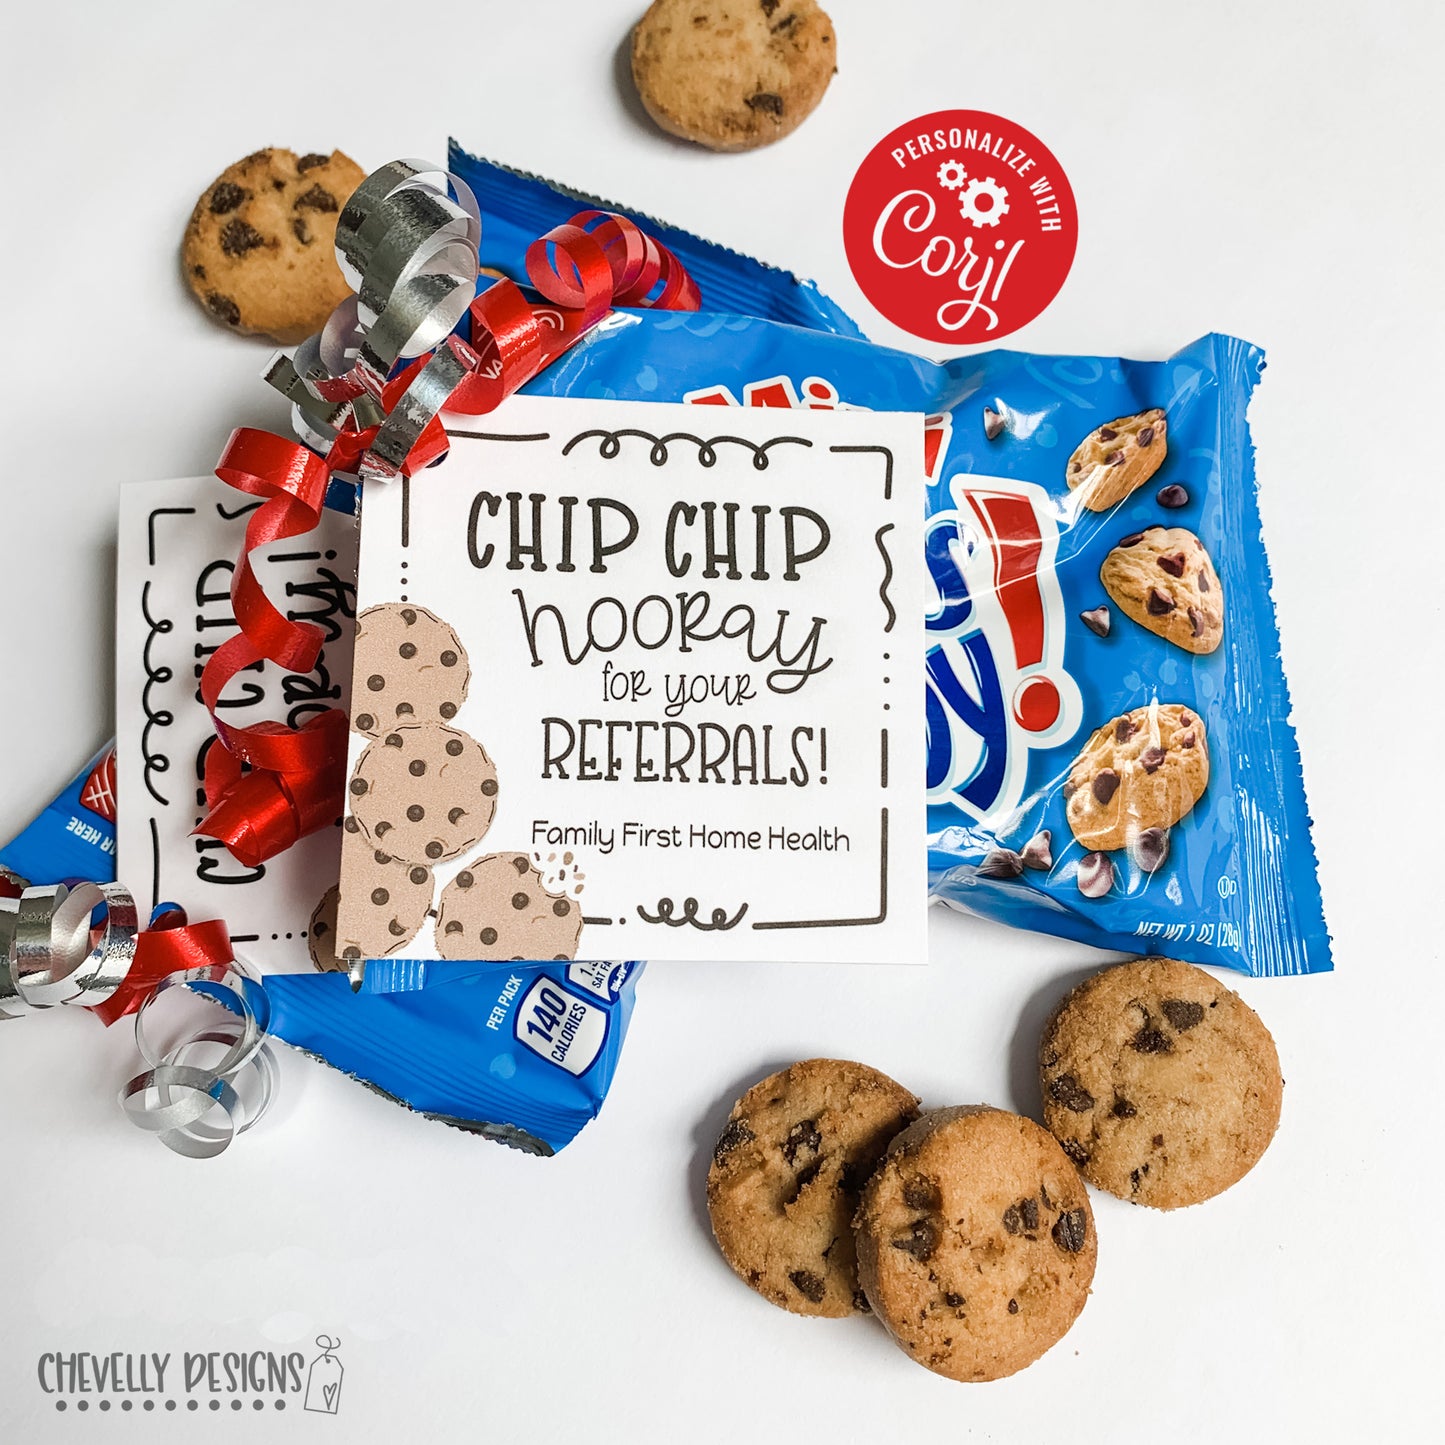 Editable - Chocolate Chip Cookie Gift Tags for Business Referrals - Printable Digital File